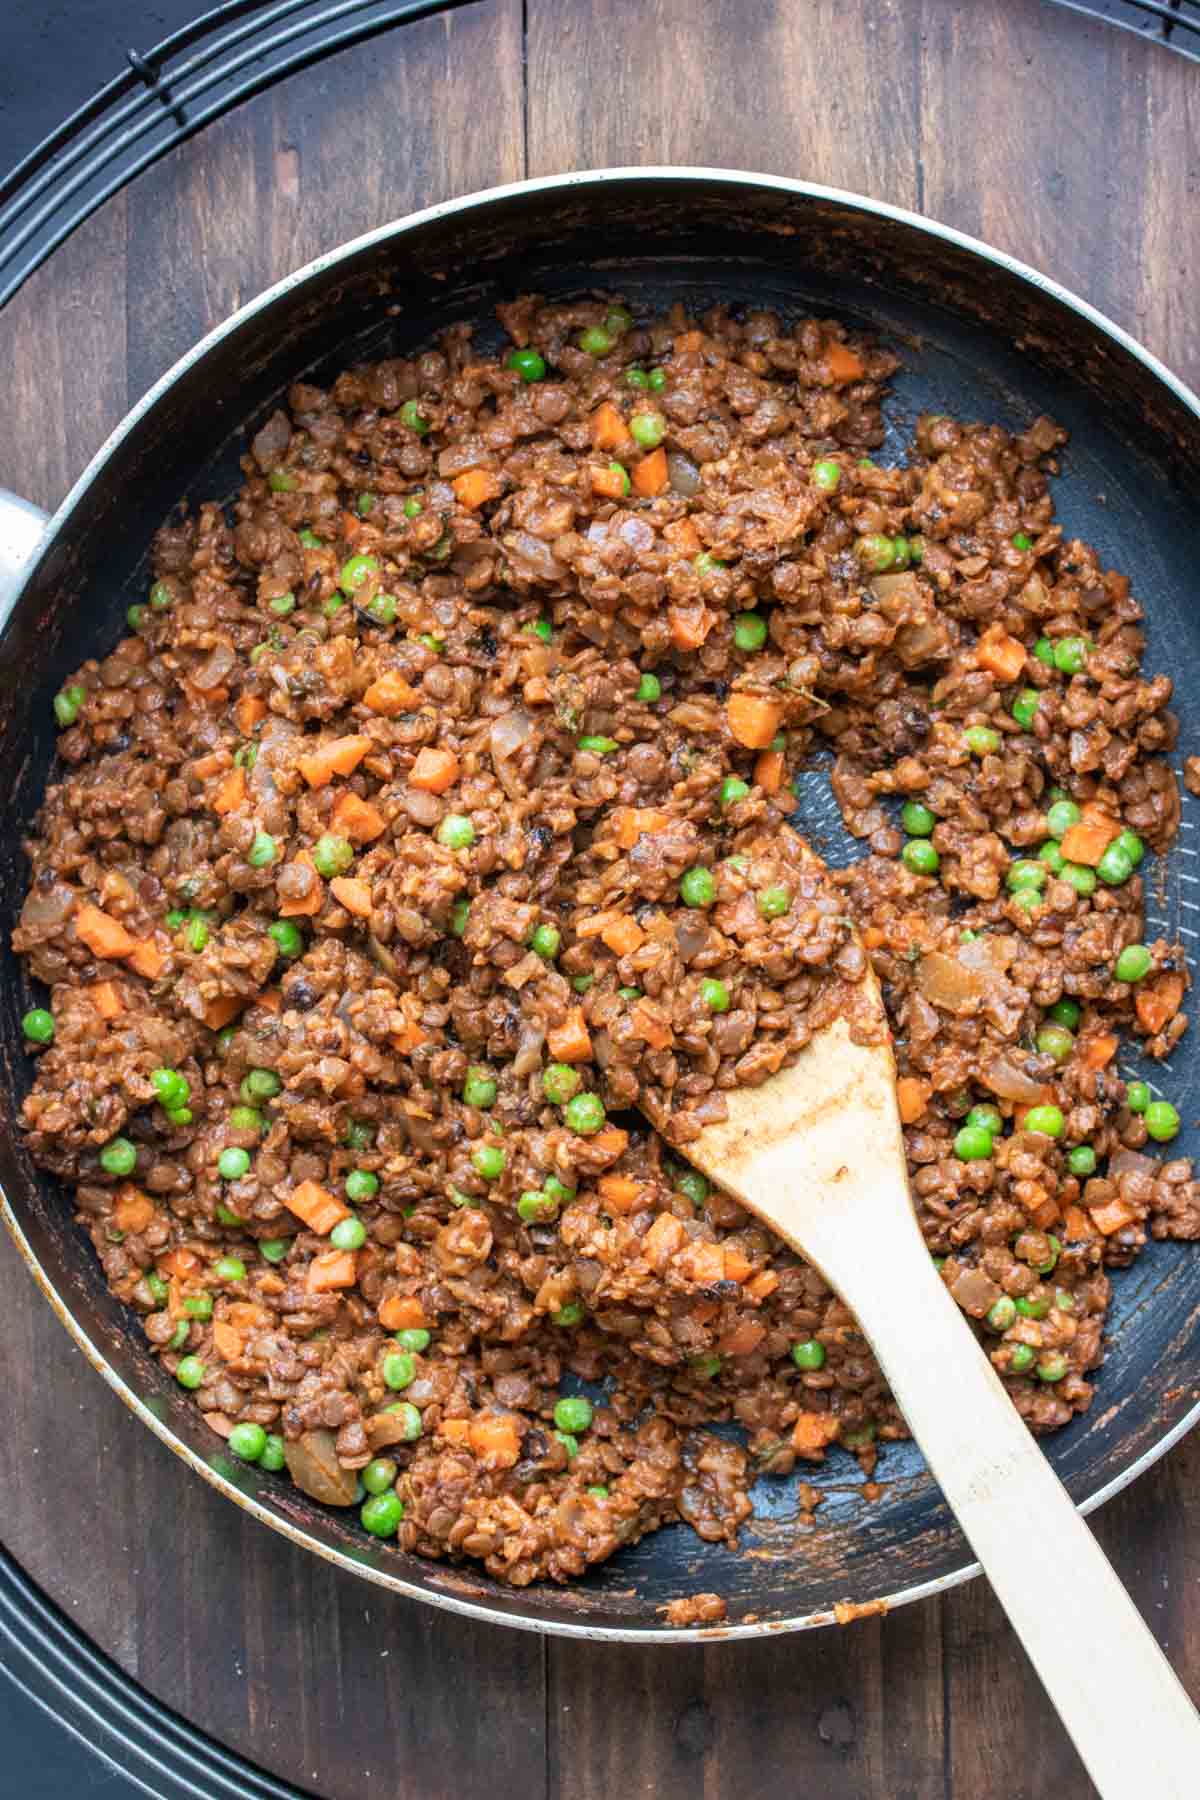 A pan with a bean based crumble with a red brown color mixed with peas and carrots and being mixed.